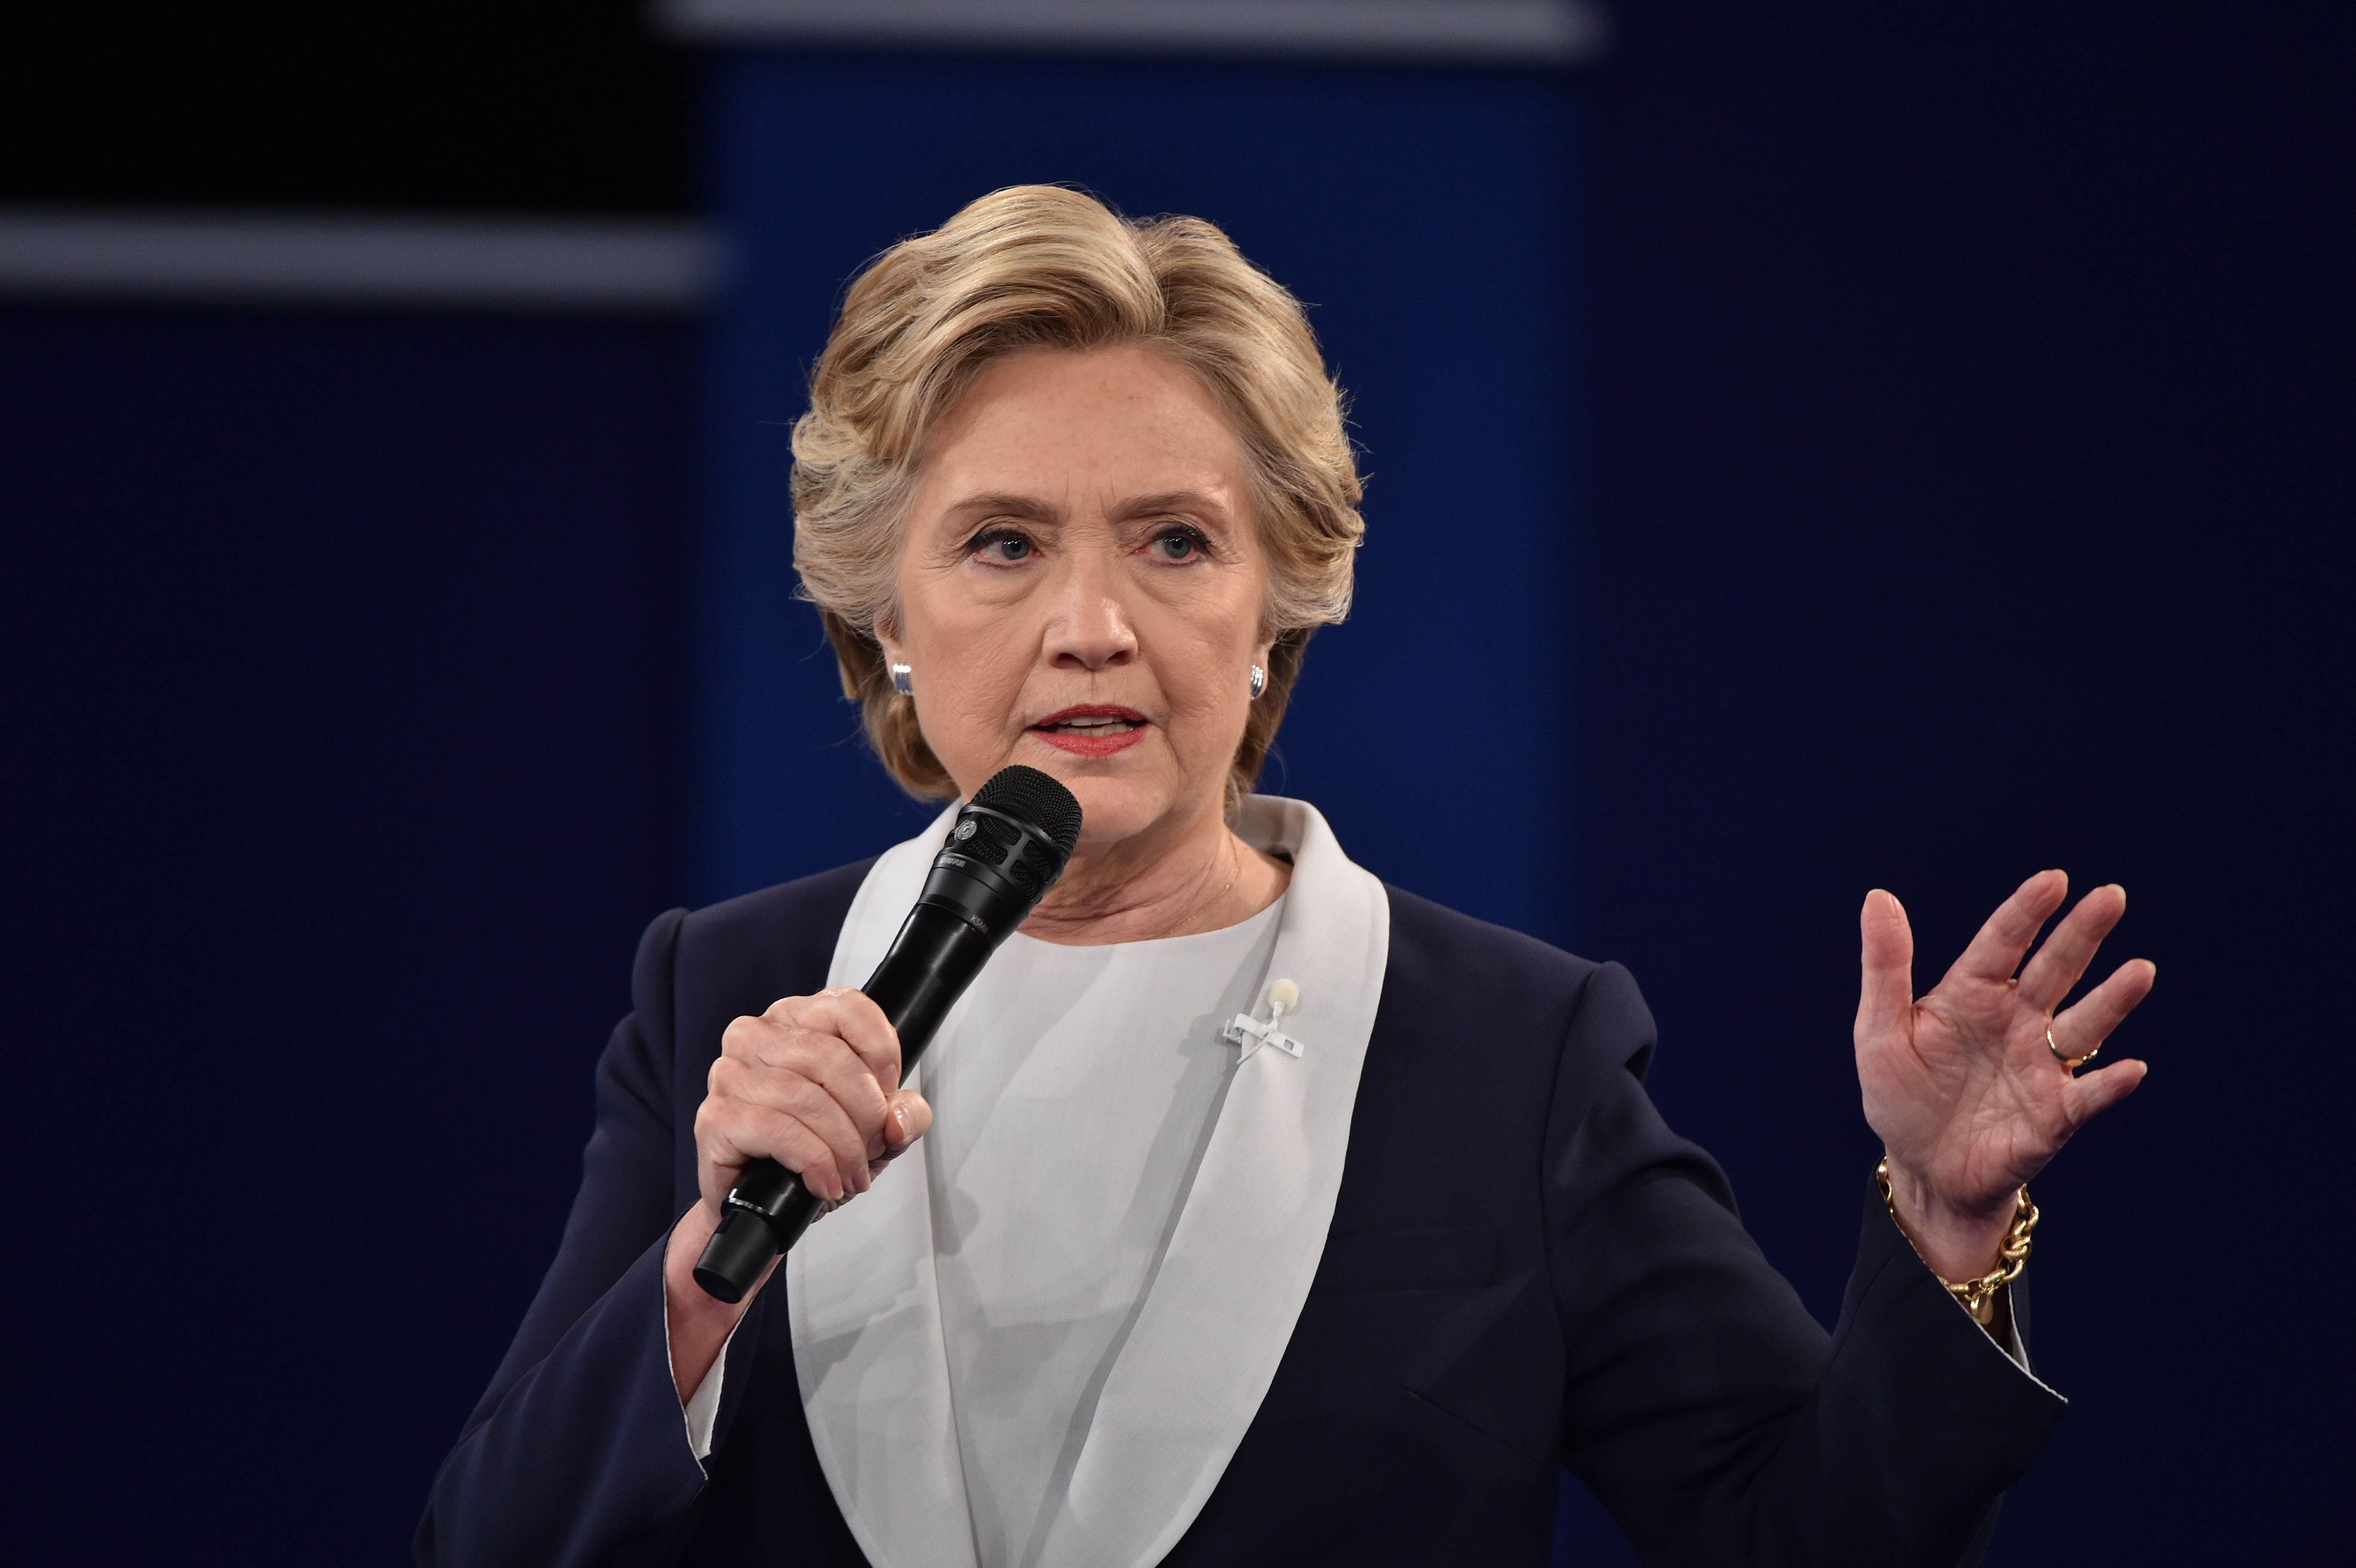 Democratic presidential candidate Hillary Clinton makes a point during the second presidential debate at Washington University in St. Louis, Missouri on October 9, 2016. / AFP PHOTO / Paul J. Richards